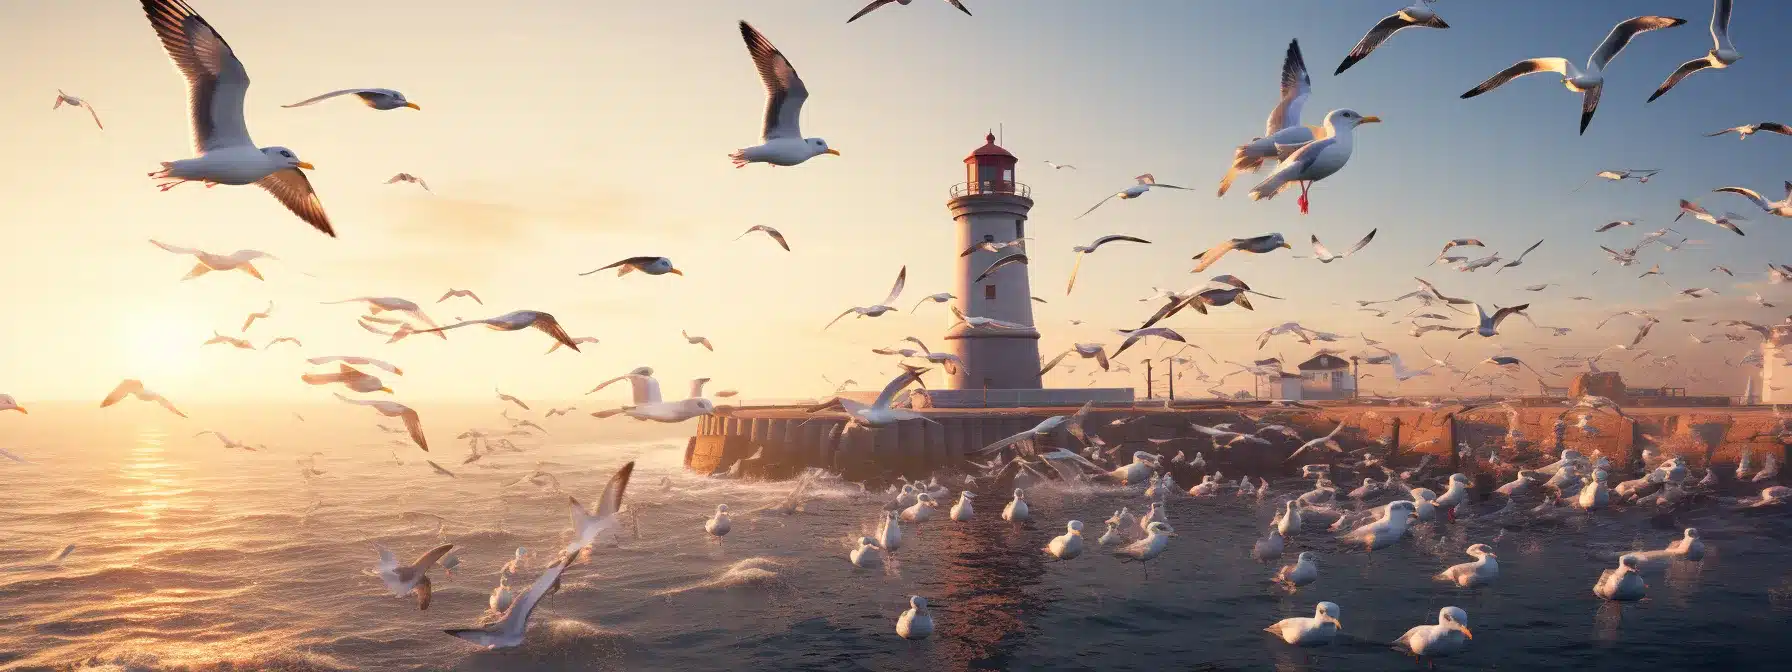 A Flock Of Carrier Pigeons Flying Over A Sea Of Competitors Towards A Lighthouse.